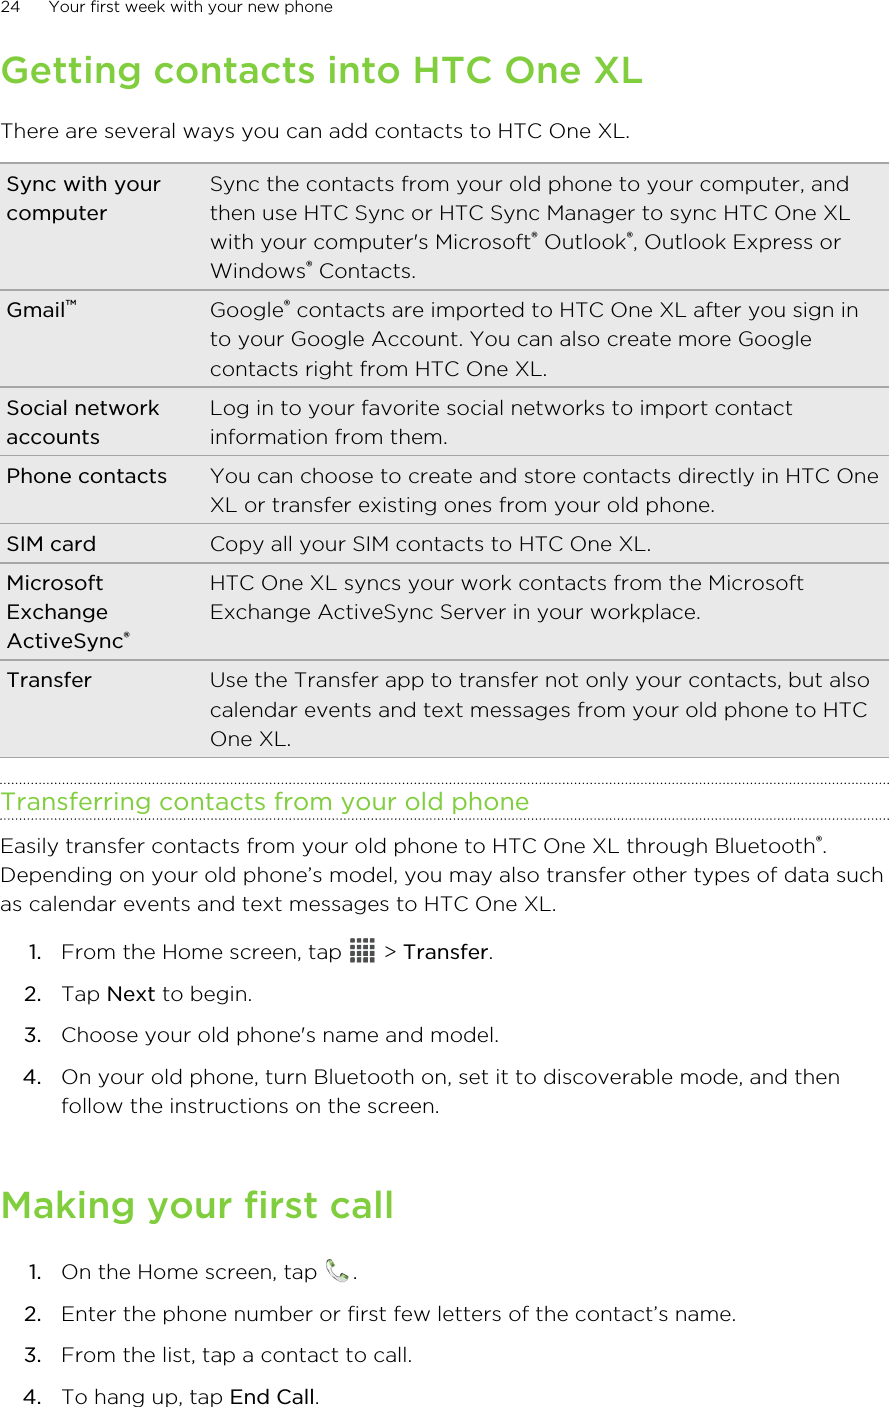 Getting contacts into HTC One XLThere are several ways you can add contacts to HTC One XL.Sync with yourcomputerSync the contacts from your old phone to your computer, andthen use HTC Sync or HTC Sync Manager to sync HTC One XLwith your computer&apos;s Microsoft® Outlook®, Outlook Express orWindows® Contacts.Gmail™Google® contacts are imported to HTC One XL after you sign into your Google Account. You can also create more Googlecontacts right from HTC One XL.Social networkaccountsLog in to your favorite social networks to import contactinformation from them.Phone contacts You can choose to create and store contacts directly in HTC OneXL or transfer existing ones from your old phone.SIM card Copy all your SIM contacts to HTC One XL.MicrosoftExchangeActiveSync®HTC One XL syncs your work contacts from the MicrosoftExchange ActiveSync Server in your workplace.Transfer Use the Transfer app to transfer not only your contacts, but alsocalendar events and text messages from your old phone to HTCOne XL.Transferring contacts from your old phoneEasily transfer contacts from your old phone to HTC One XL through Bluetooth®.Depending on your old phone’s model, you may also transfer other types of data suchas calendar events and text messages to HTC One XL.1. From the Home screen, tap   &gt; Transfer.2. Tap Next to begin.3. Choose your old phone&apos;s name and model.4. On your old phone, turn Bluetooth on, set it to discoverable mode, and thenfollow the instructions on the screen.Making your first call1. On the Home screen, tap  .2. Enter the phone number or first few letters of the contact’s name.3. From the list, tap a contact to call.4. To hang up, tap End Call.24 Your first week with your new phone